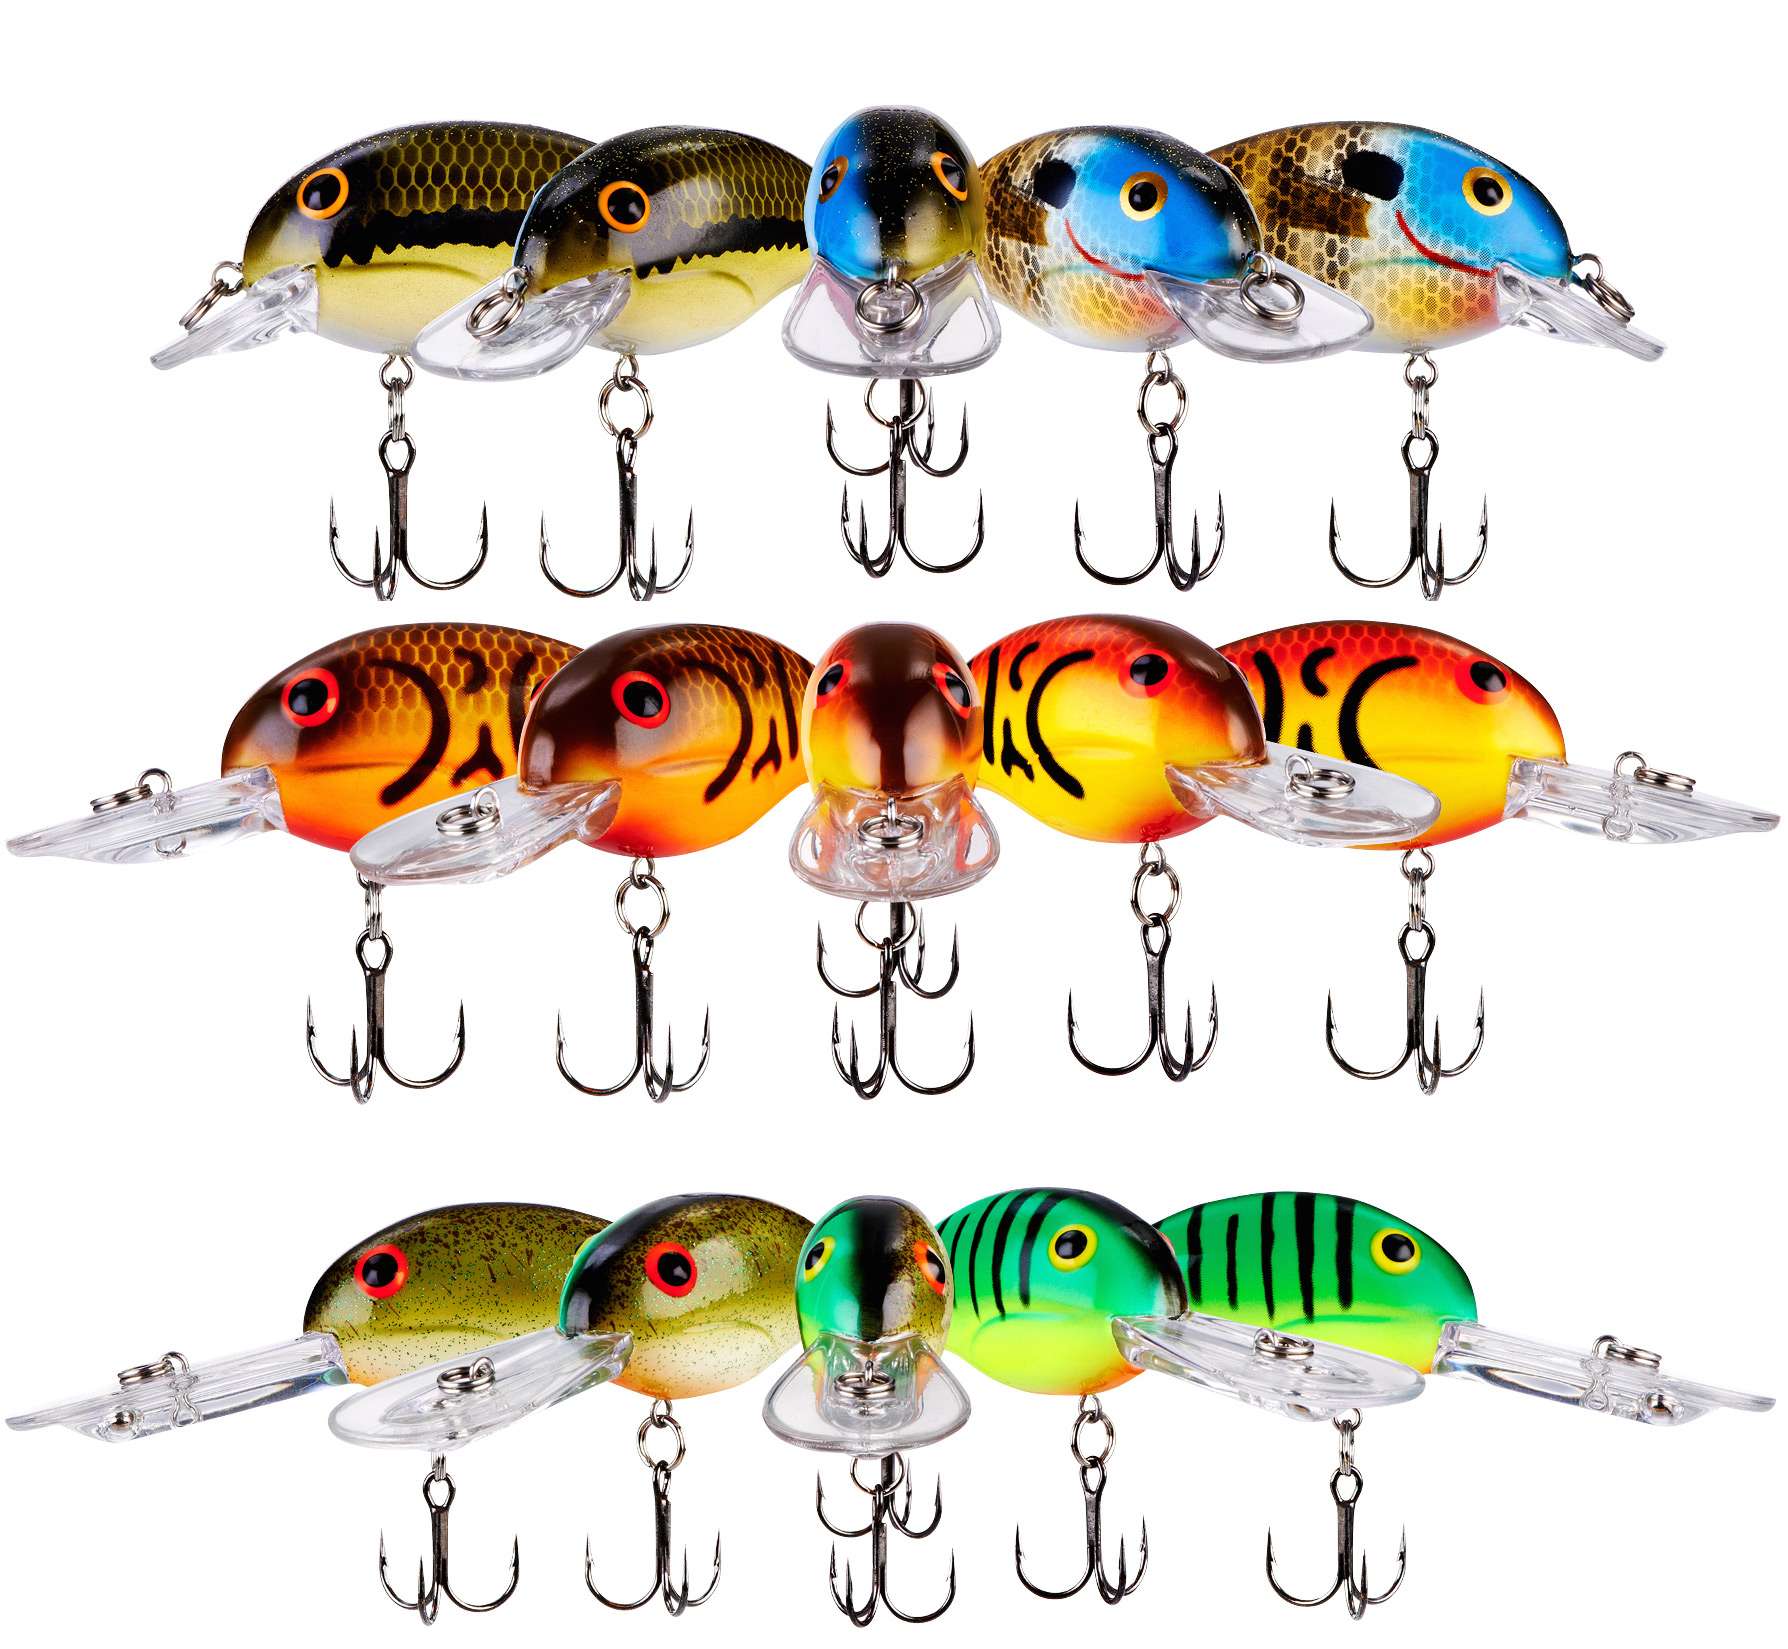 <b>Bandit Lures</b><br>	Mistake Crankbaits<br>	Bandit's Mistake line is expanding to include more colors. These baits may look like a mistake, but they are intentionally taking two color patterns and combining them into one crankbait. Crossbreed features a Baby Bass on one side, a River Bream on the other. Malfunction features two crawfish patterns- Brown Craw Orange Belly and Spring Craw. Mistaken Identity takes a Fire Tiger pattern and melds it with Root Beer. These crazy baits are available in Bandit's 100, 200 and 300 series of crankbaits. 